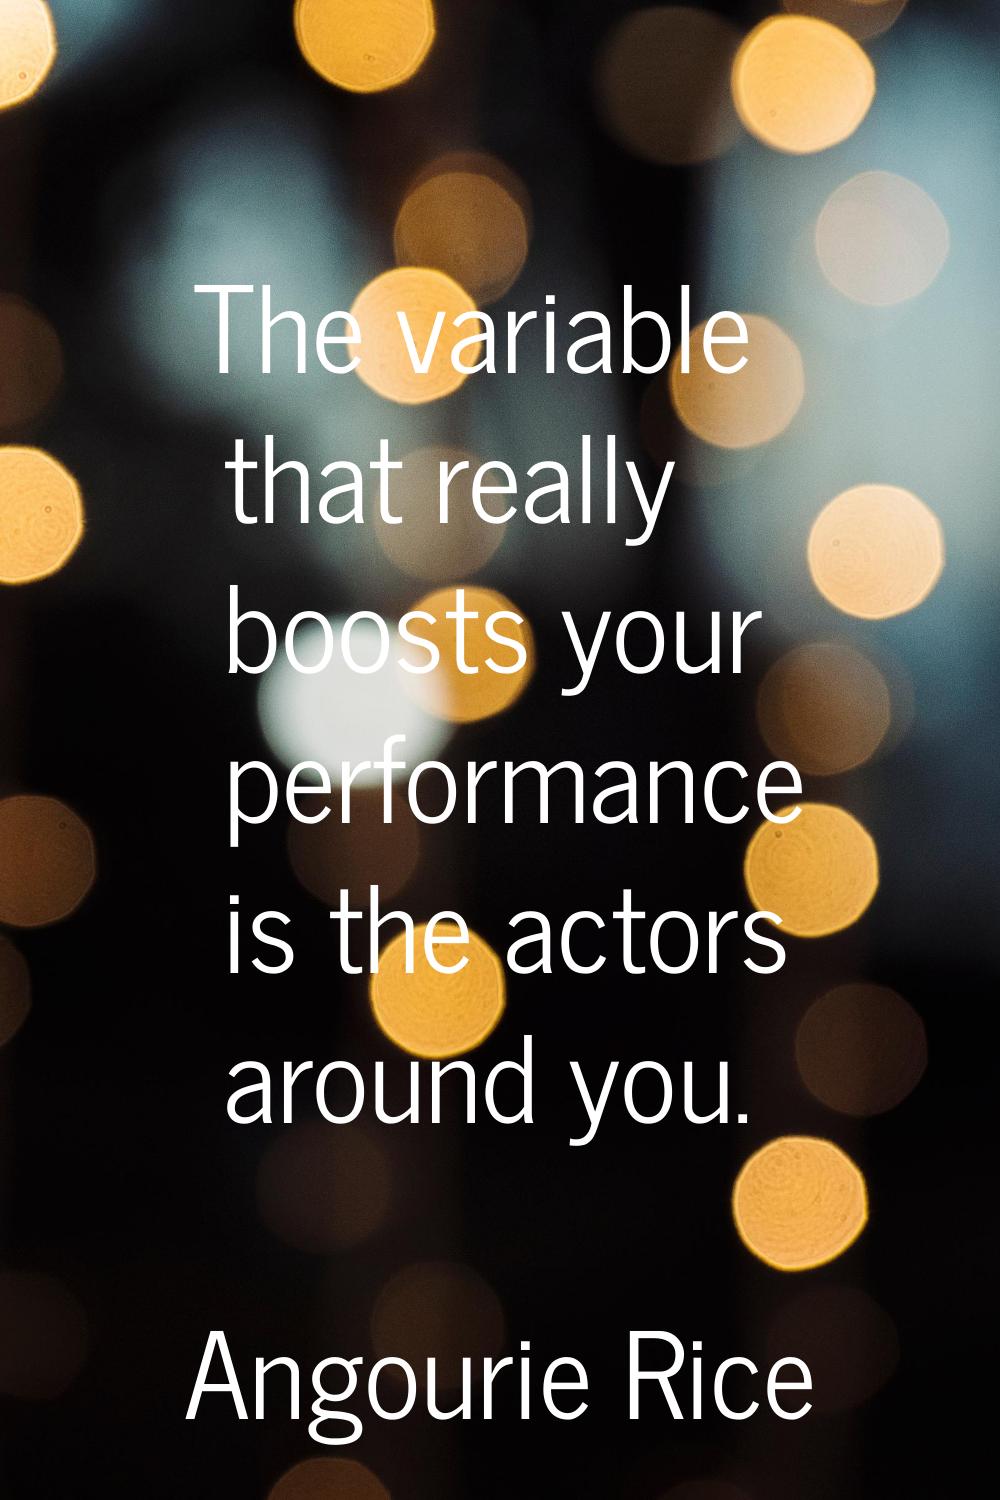 The variable that really boosts your performance is the actors around you.